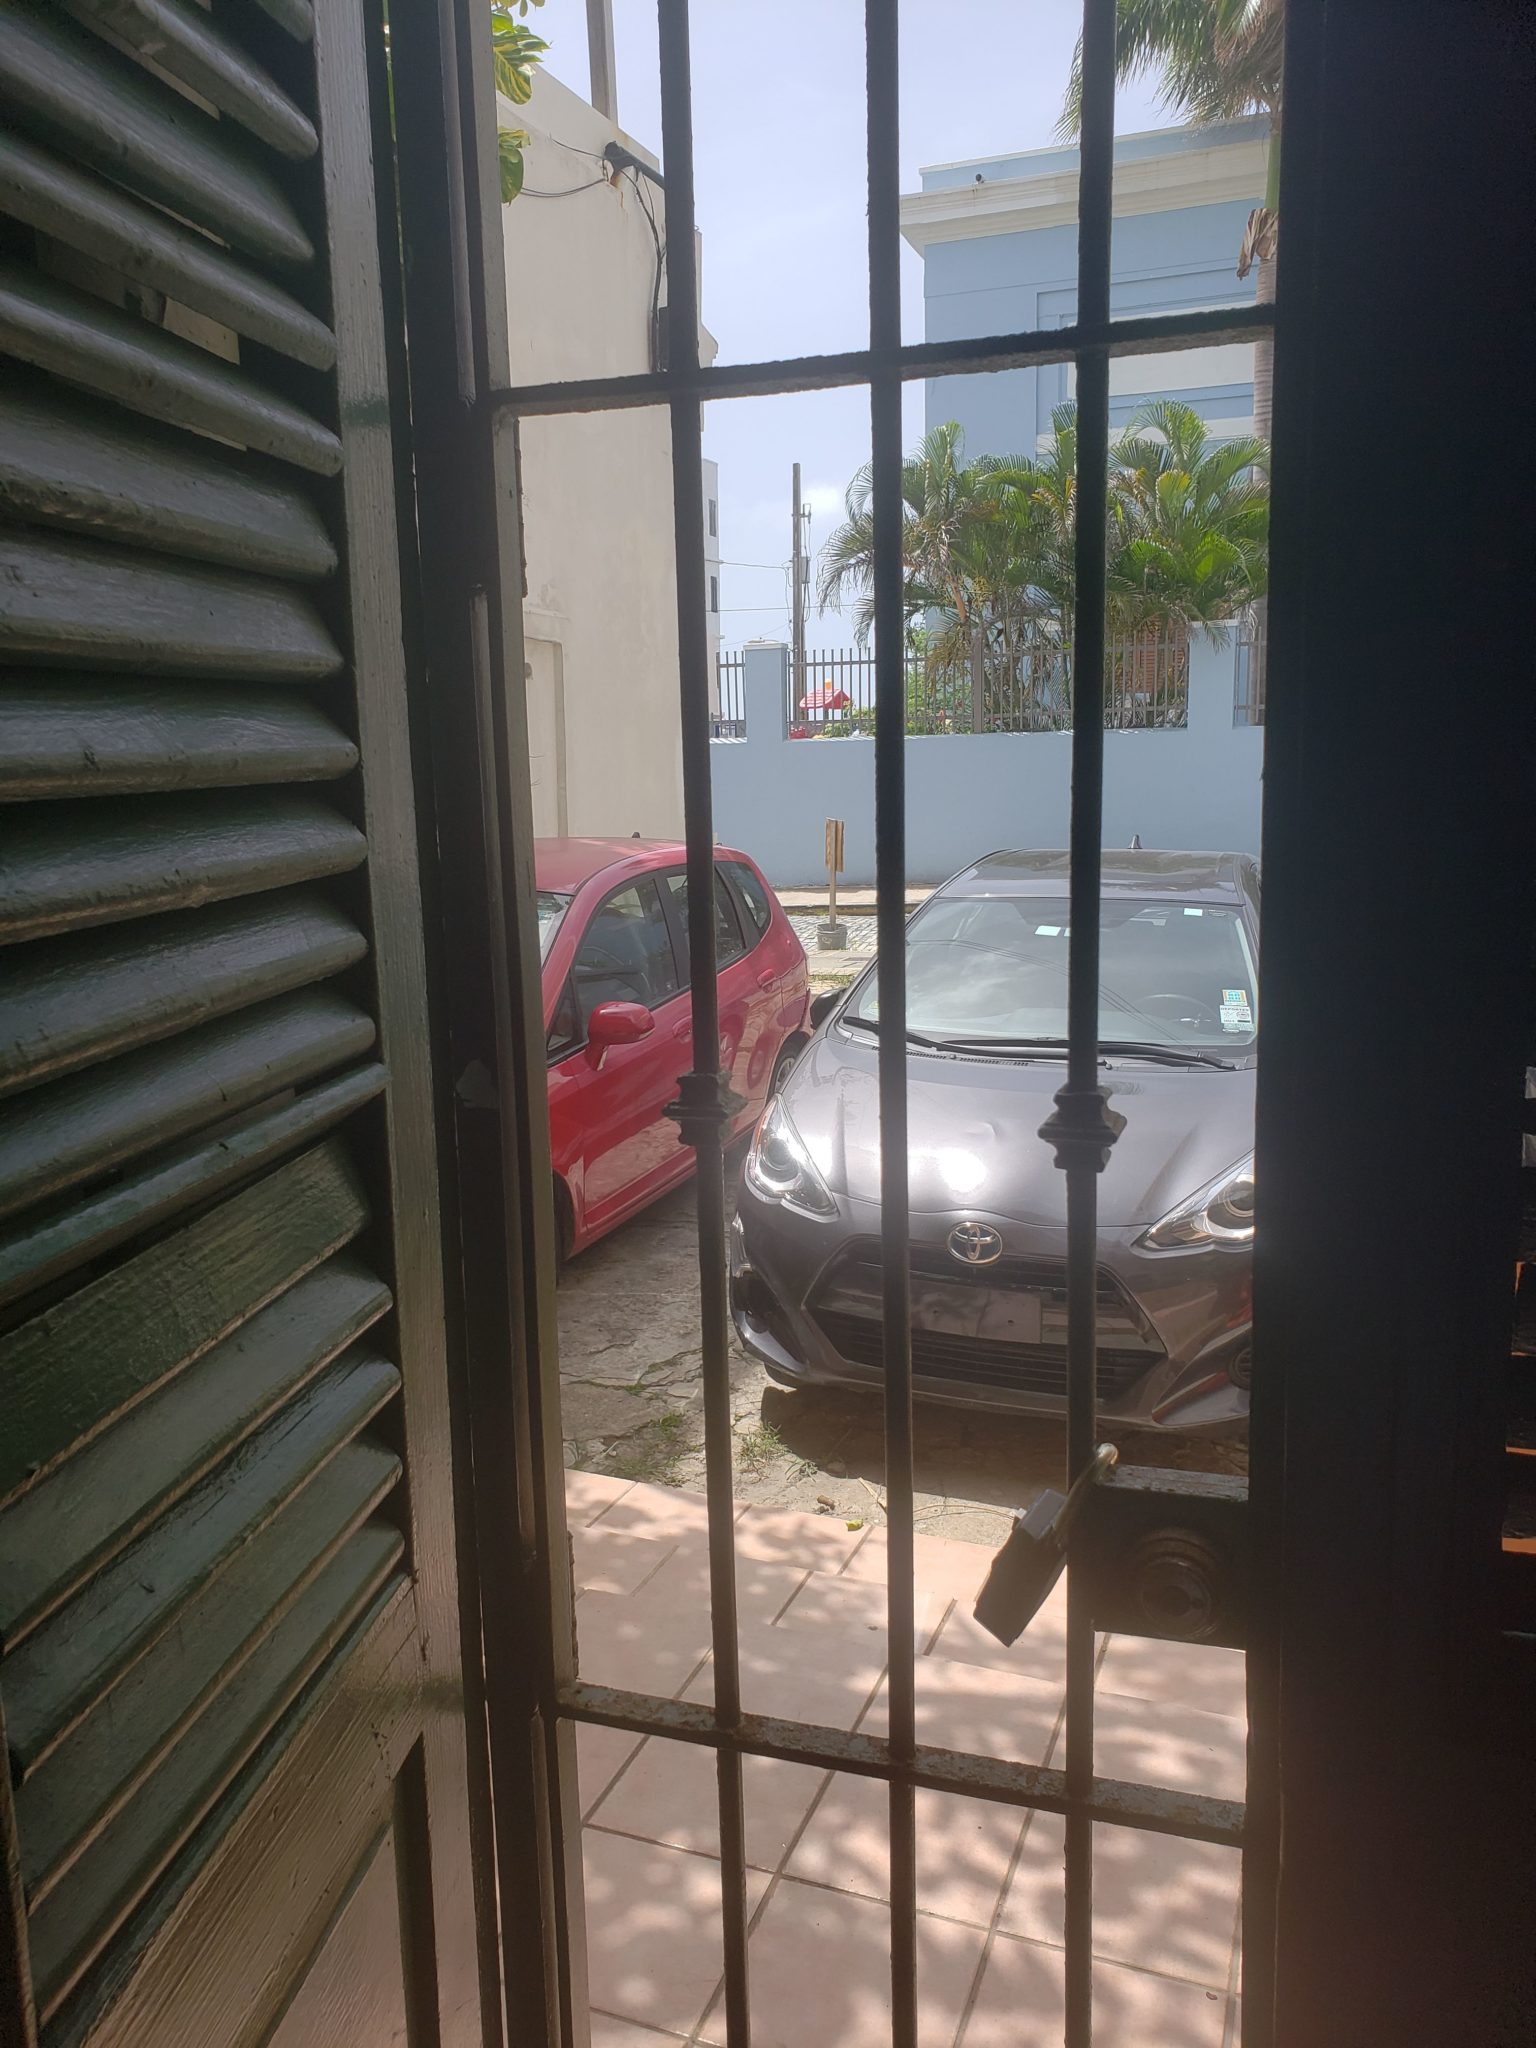 a door with bars and a car parked in a parking lot